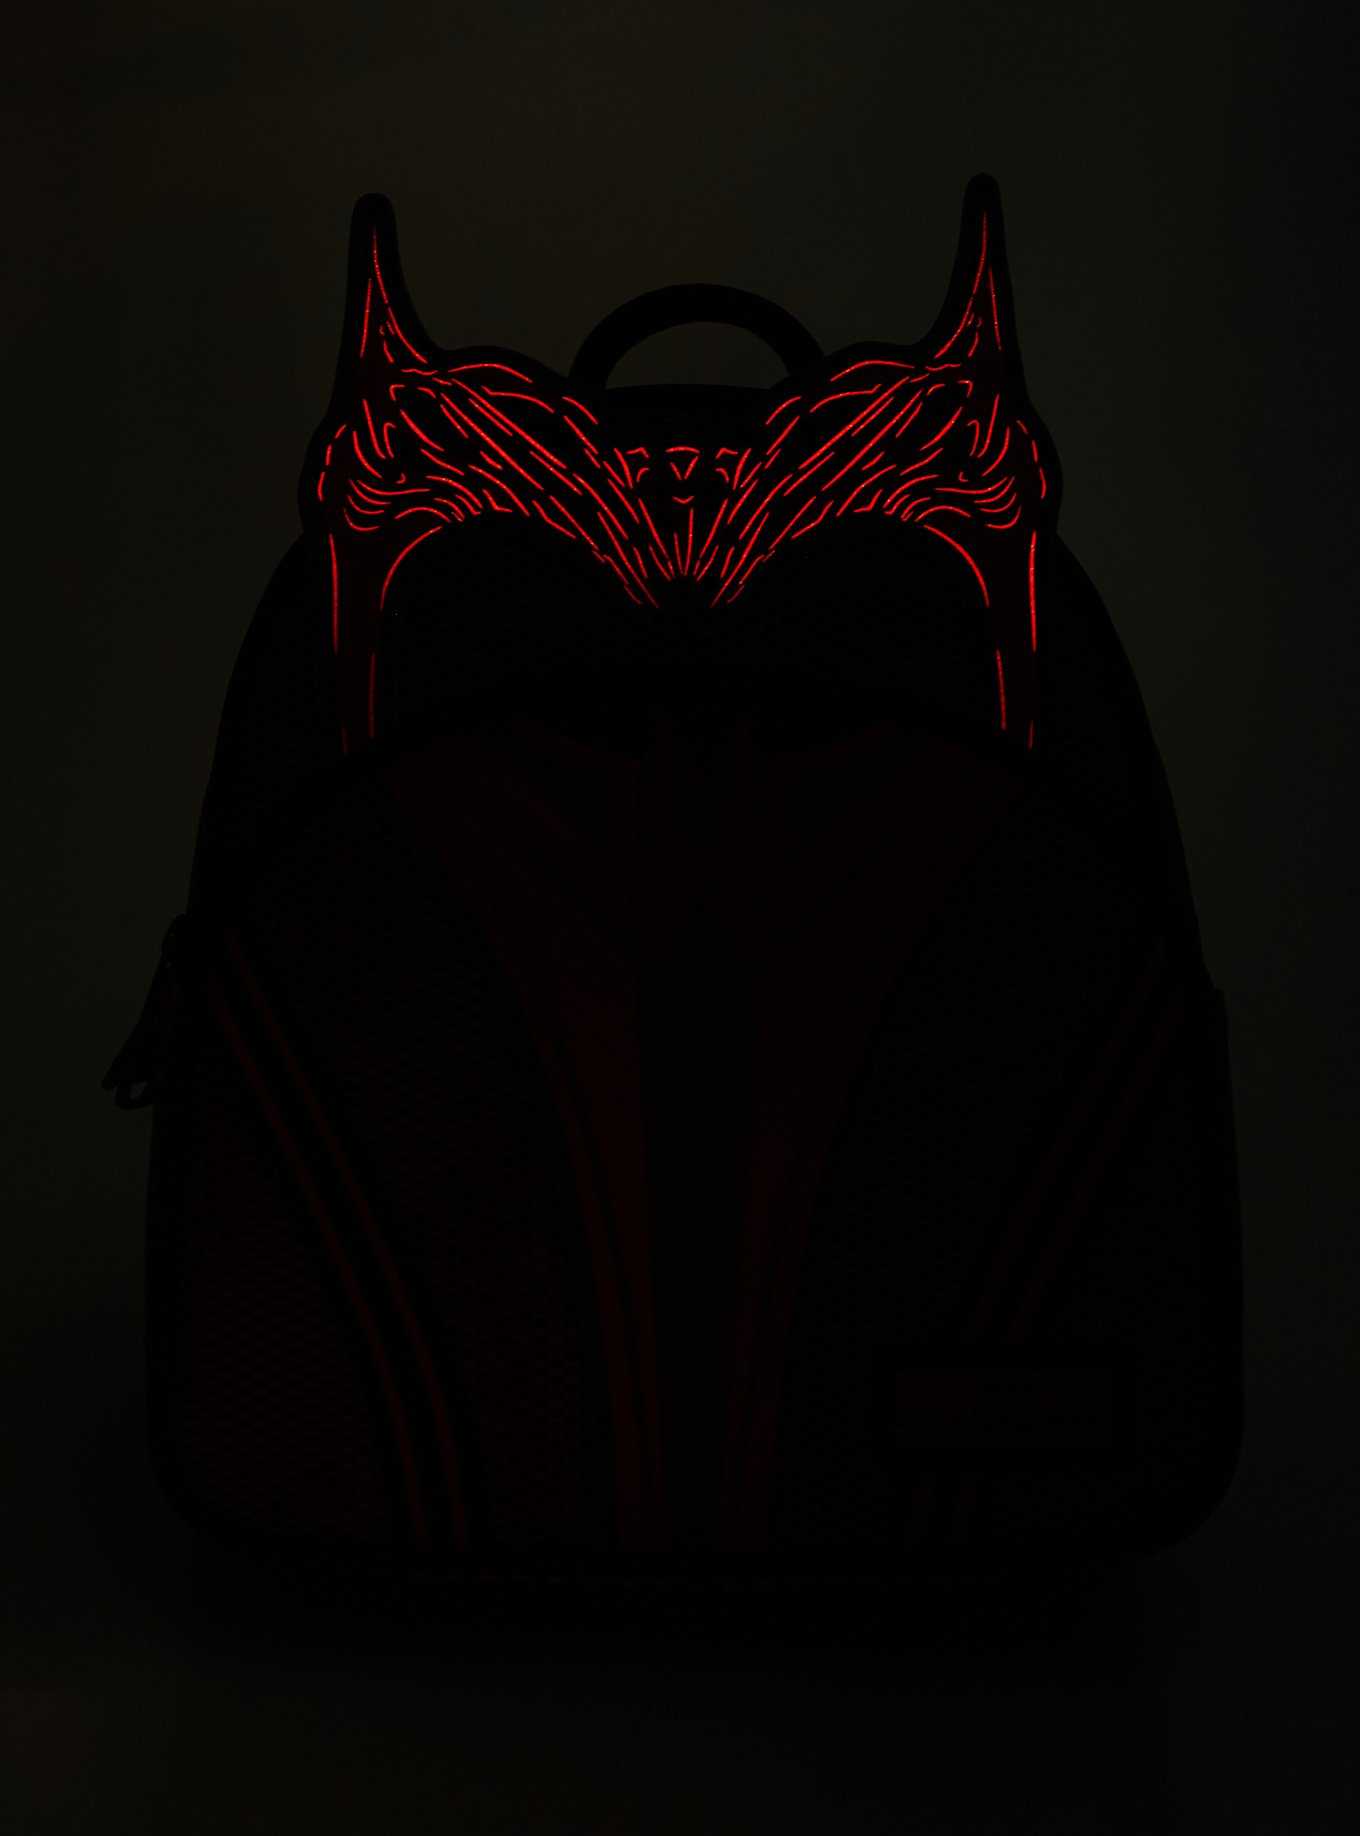 Loungefly Marvel WandaVision Scarlet Witch Glow-in-the-Dark Costume Mini Backpack - BoxLunch Exclusive, , hi-res